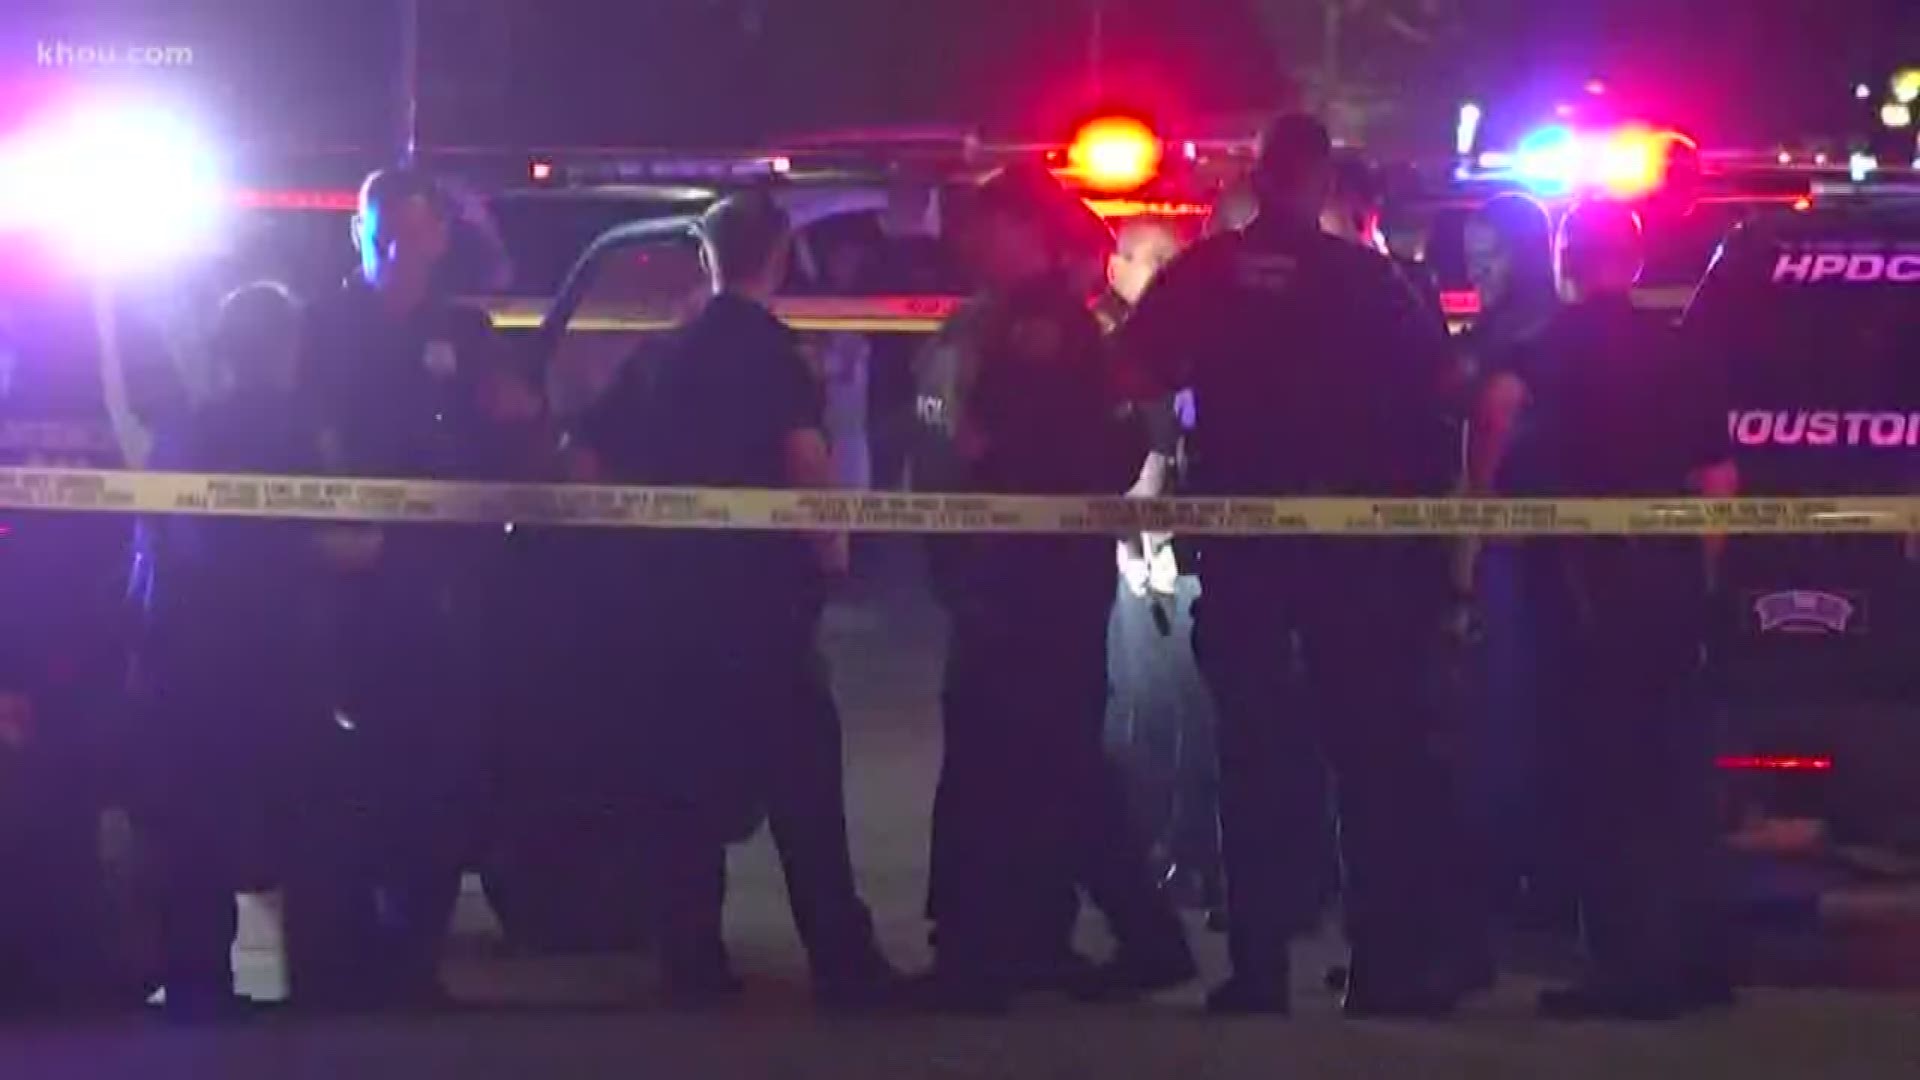 There were two deadly shootings involving police officers overnight in the Houston area.